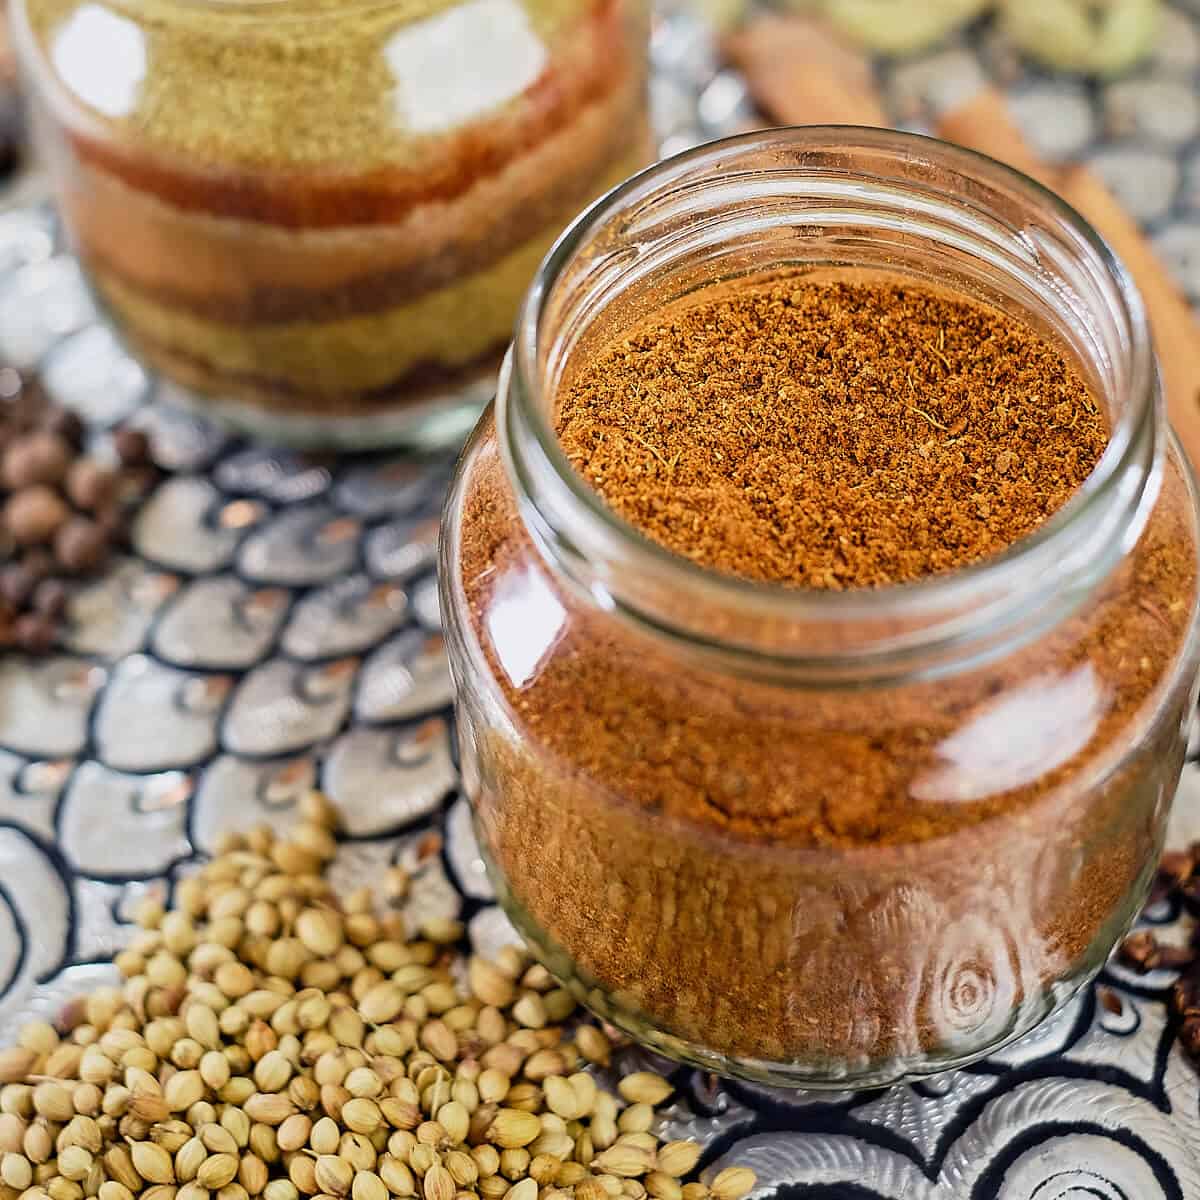 https://www.thedeliciouscrescent.com/wp-content/uploads/2023/01/Baharat-5.jpg